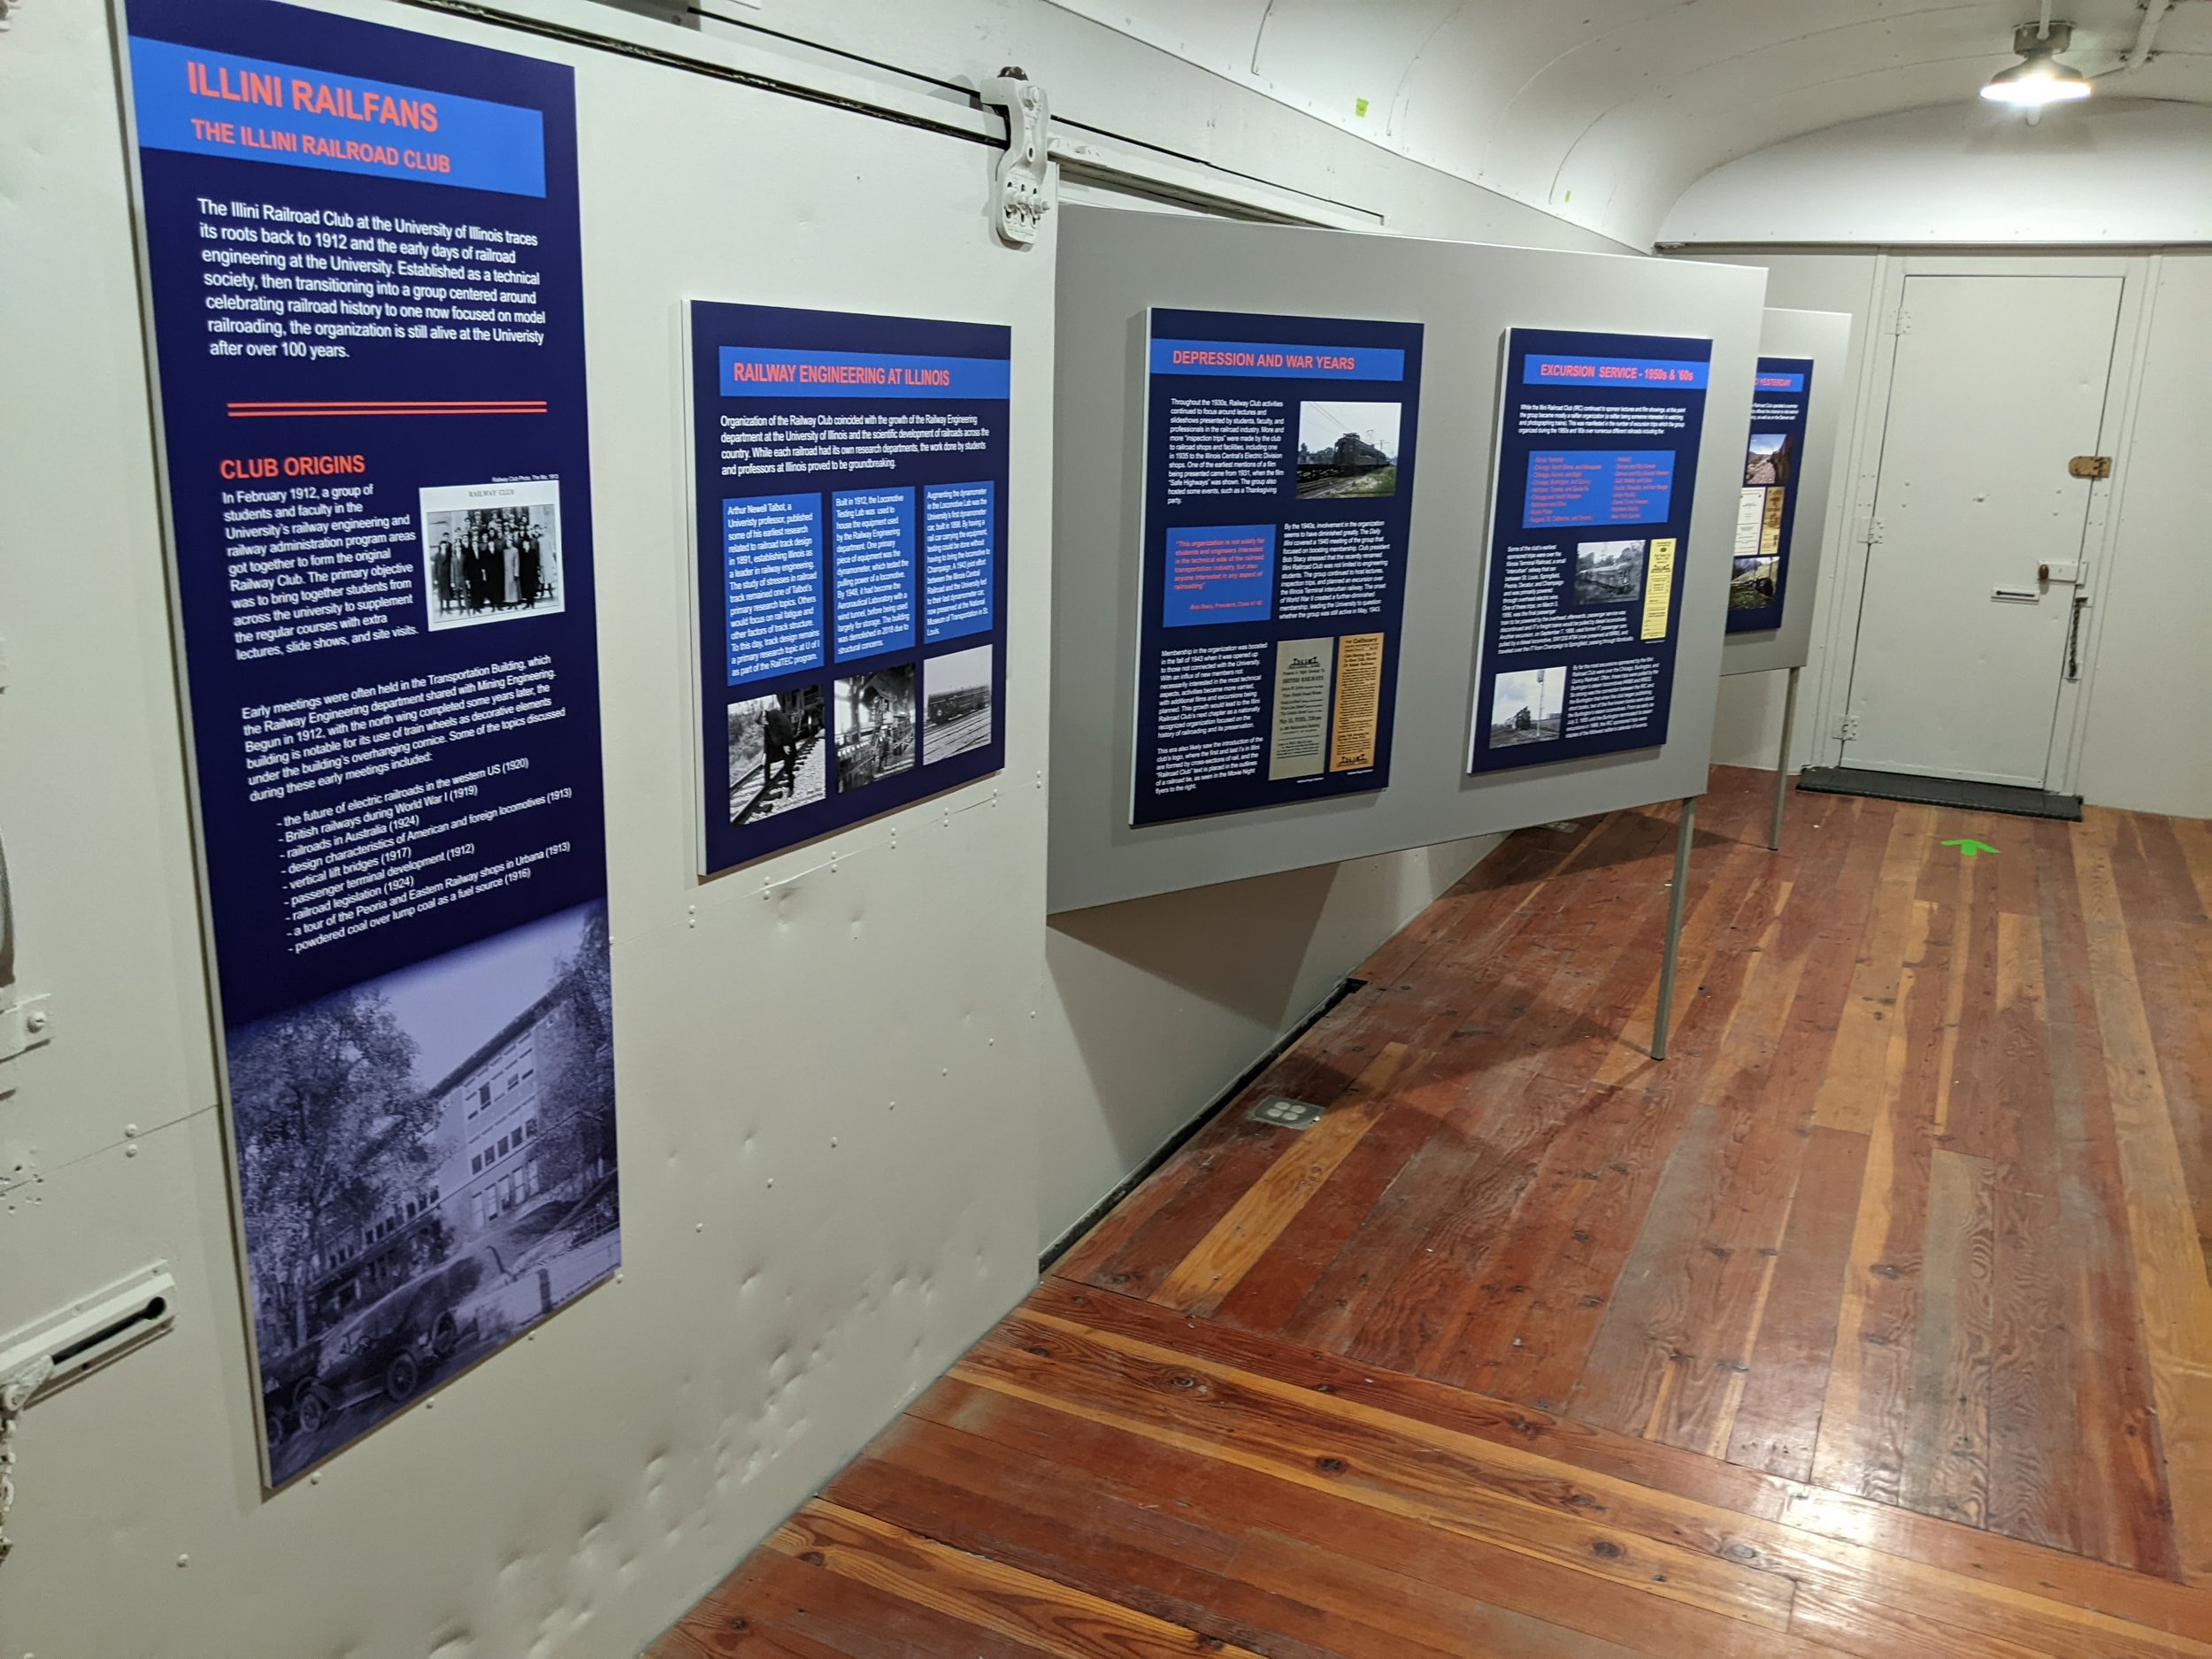  The new displays include exhibits about the history of the Illini Railroad Club, which is a club of students who attend the University of Illinois with an interest in railroading.  